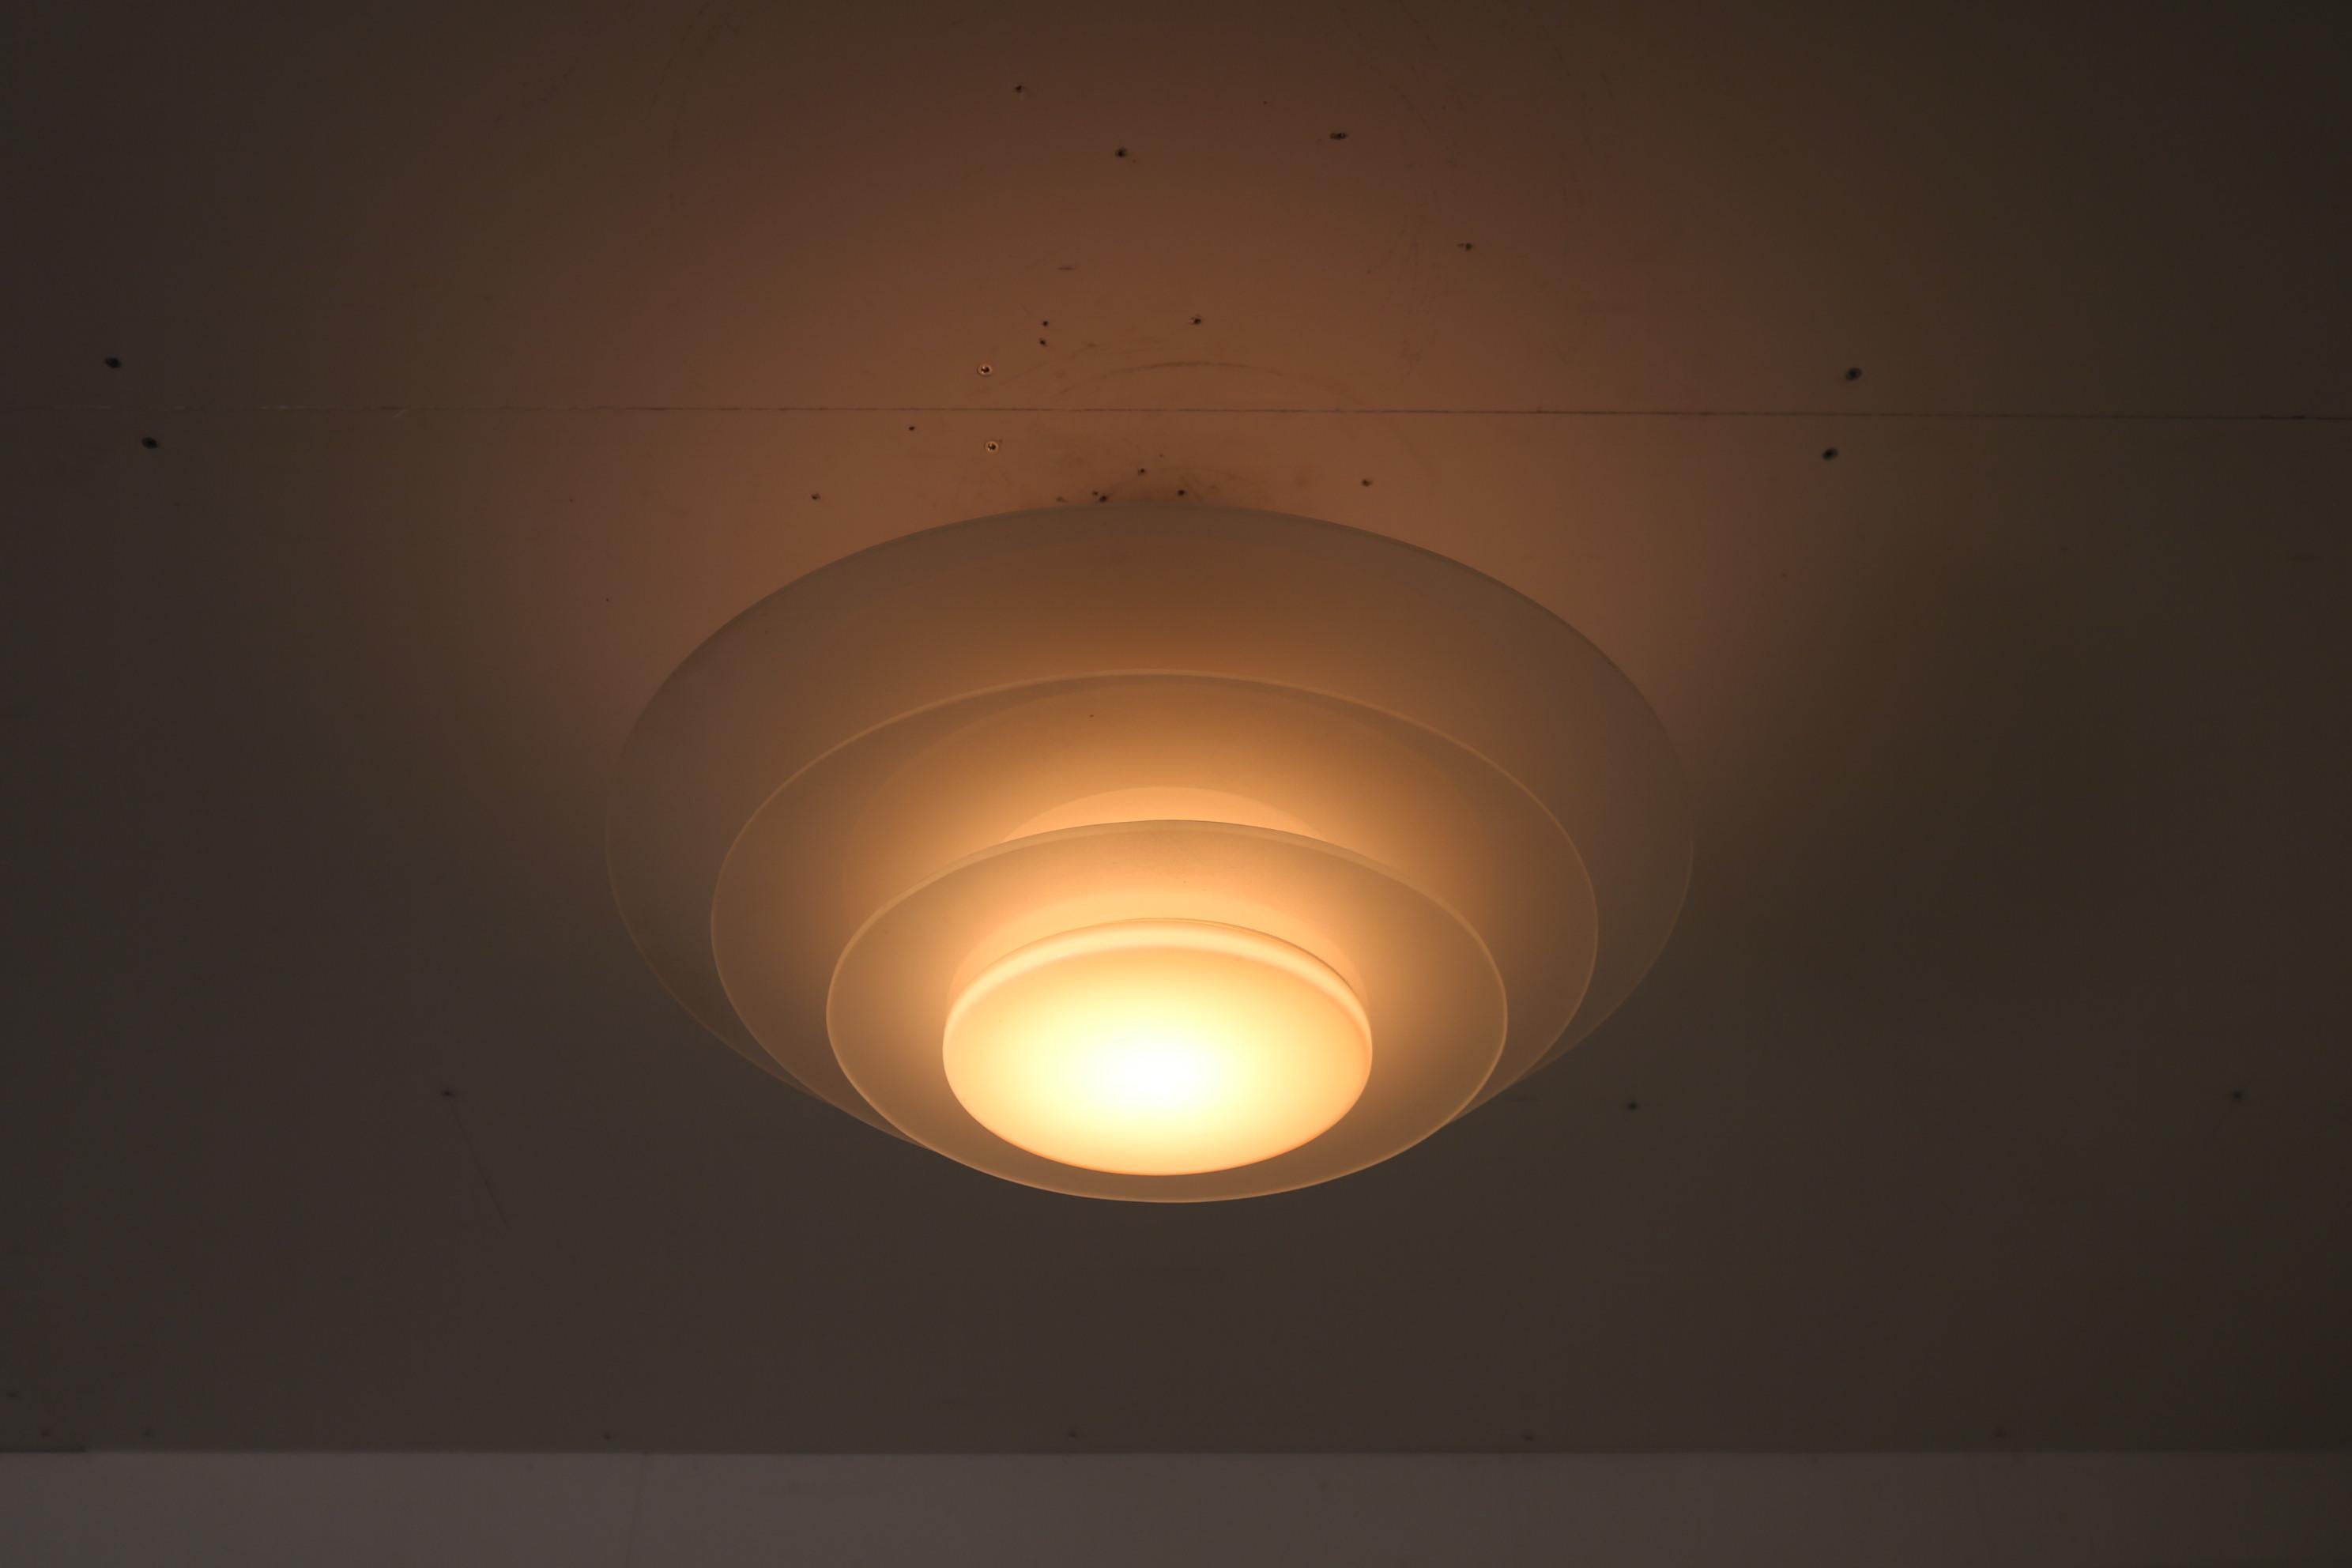 A wonderful ceiling lamp, manufactured by Bohlmarks in Sweden around 1930.

This eye-catching piece is made of several satin glass rings, beautifully layered and allowing a really nice, warm light to emit. The light is nicely diffused by the cream